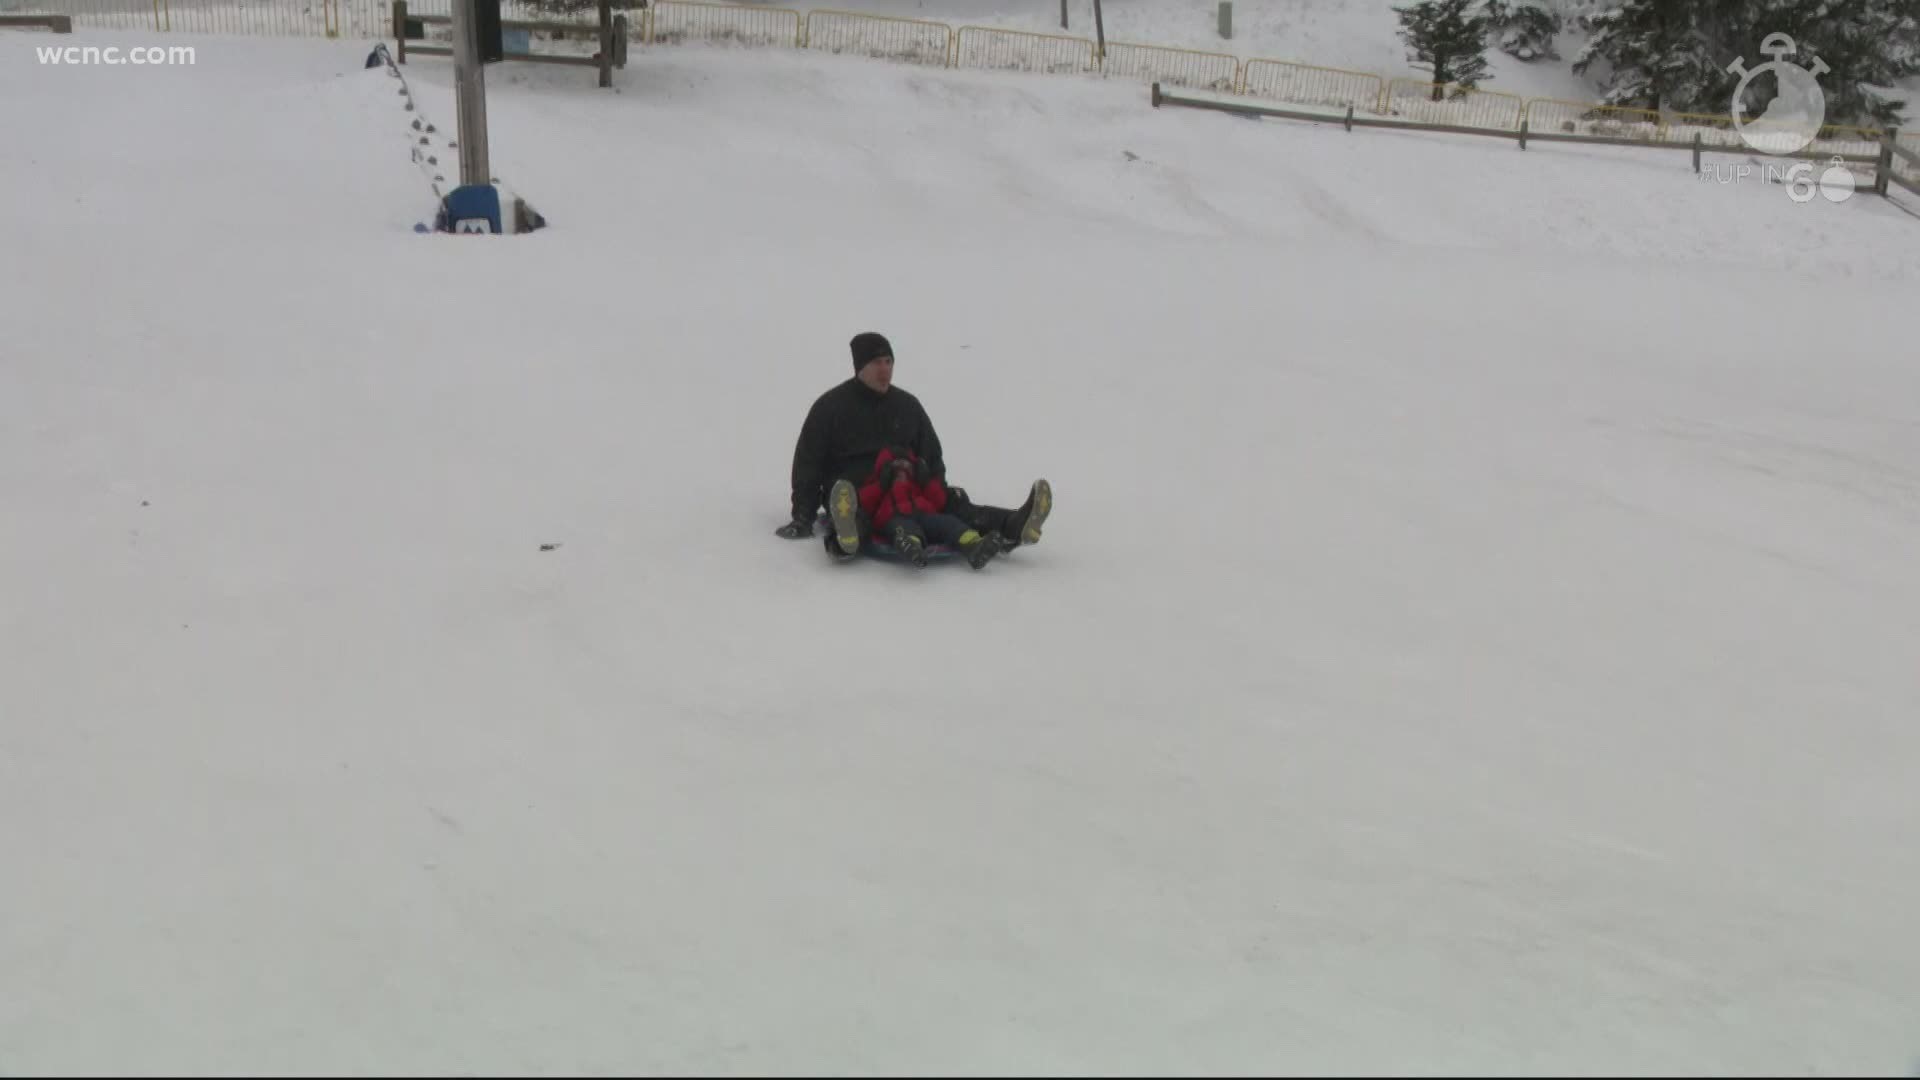 Sledding at Beech Mountain is a free day of fun 7 days a week